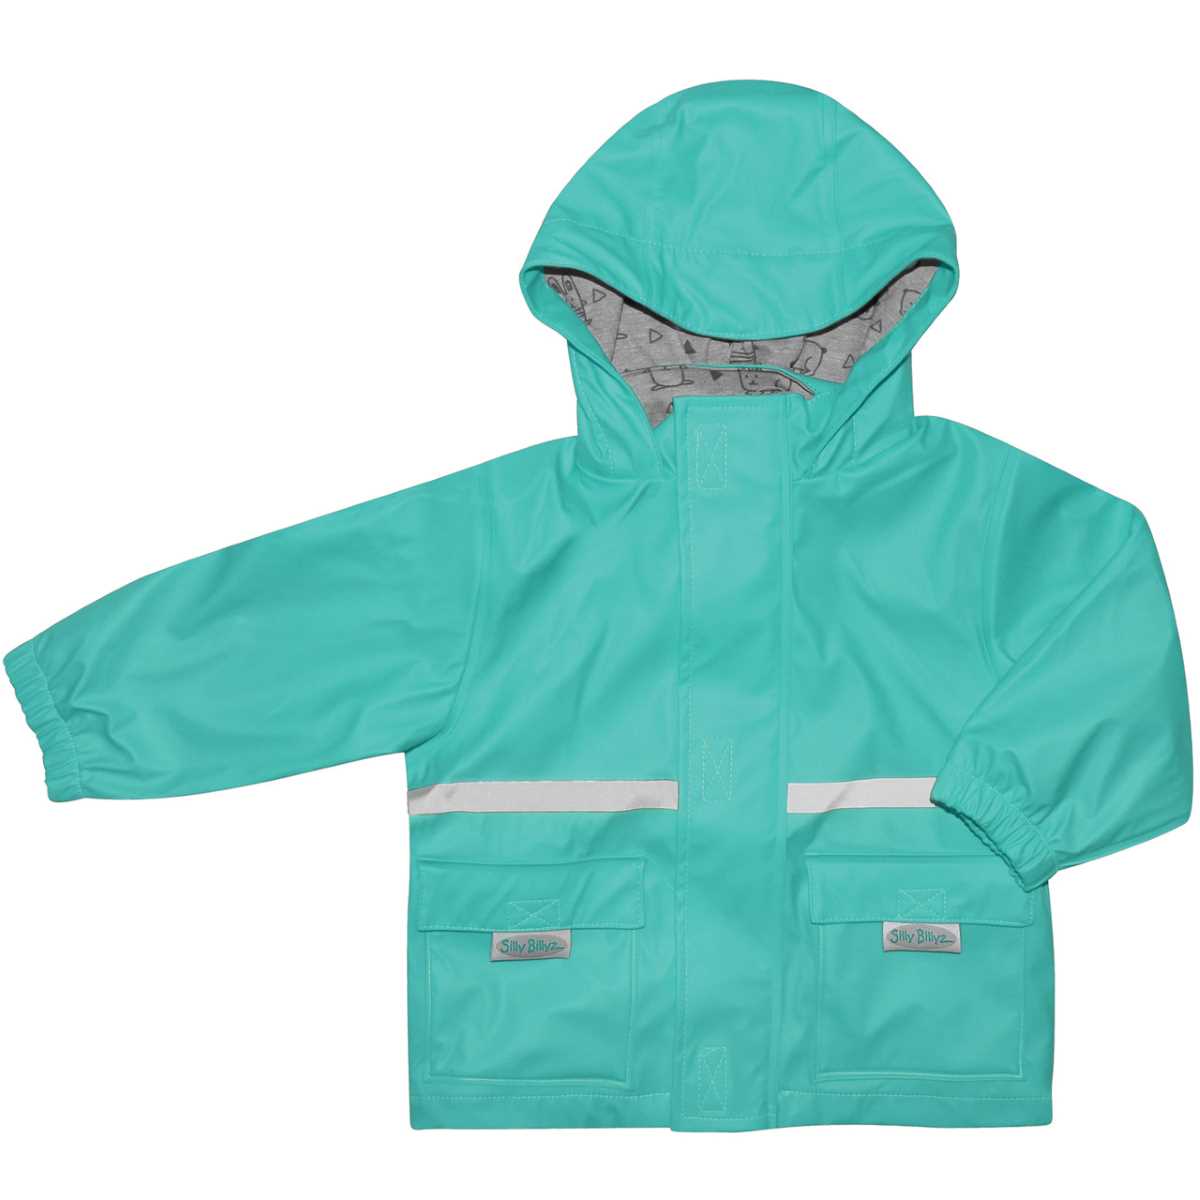 Stylish windproof and waterproof hooded jacket by Silly Billyz. Made from high quality PU which is both durable and beautifully soft and with their signature Rabbit Print polycotton lining for added comfort.